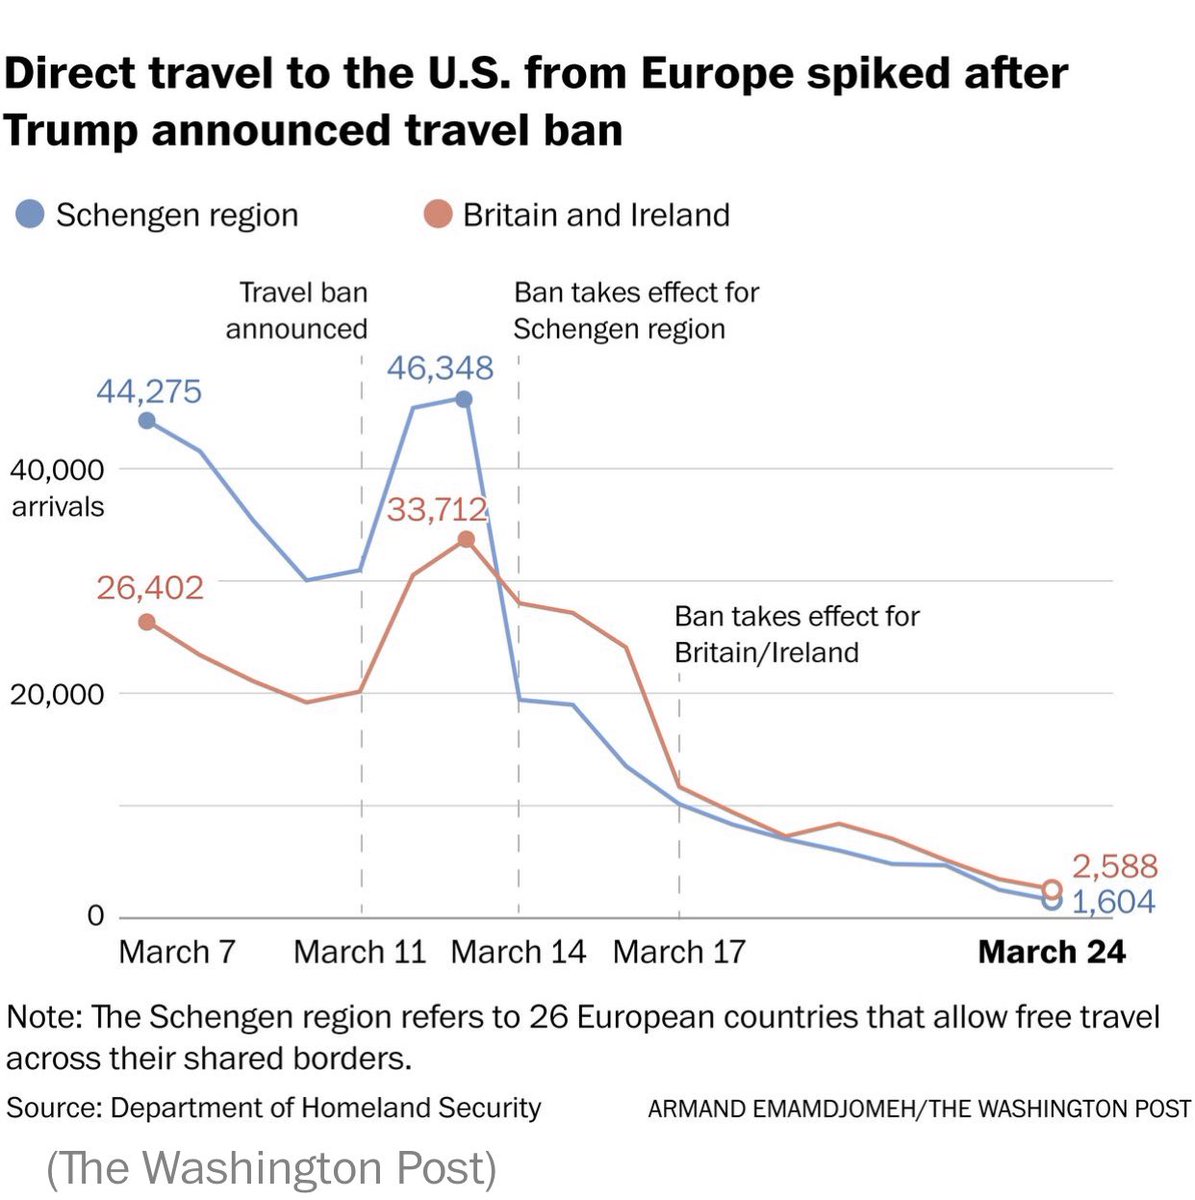 This is what acting too late looks like. When Trump imposed travel bans on Europe,  #covid19 was already deeply circulating in the US (mostly from European influx). His bans actually just caused a surge in importing more cases.  https://www.washingtonpost.com/world/national-security/one-final-viral-infusion-trumps-move-to-block-travel-from-europe-triggered-chaos-and-a-surge-of-passengers-from-the-outbreaks-center/2020/05/23/64836a00-962b-11ea-82b4-c8db161ff6e5_story.html